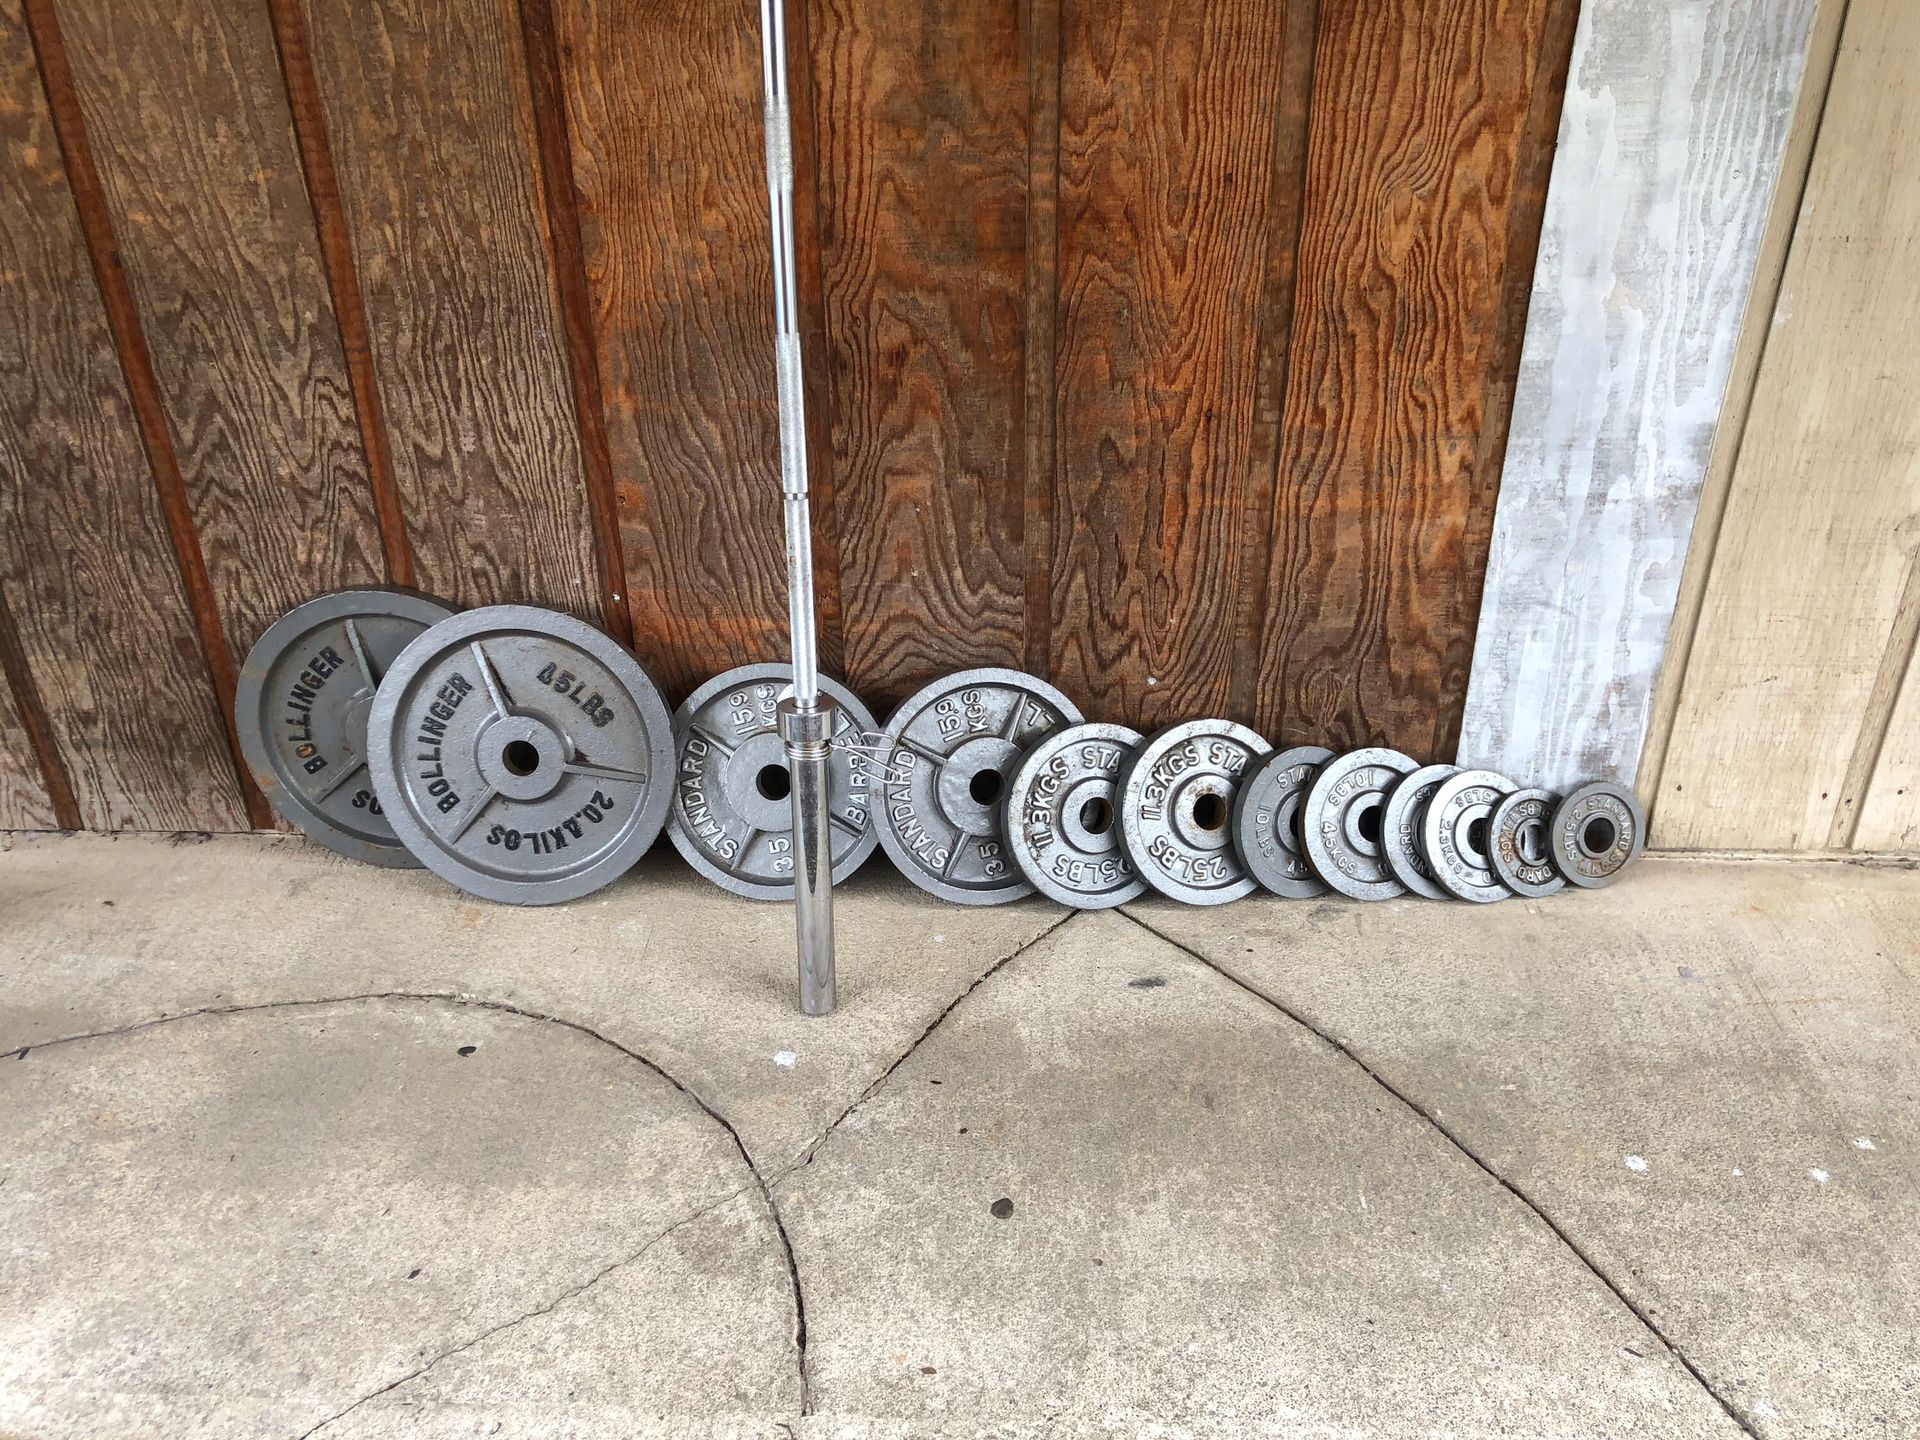 Olympic weights and 7 ft 45 lb bar with collars 45s 35s 25s 10s 5s 2.5s Barbell $60 includes collars Olympic weight set $180 Both together $220 pric